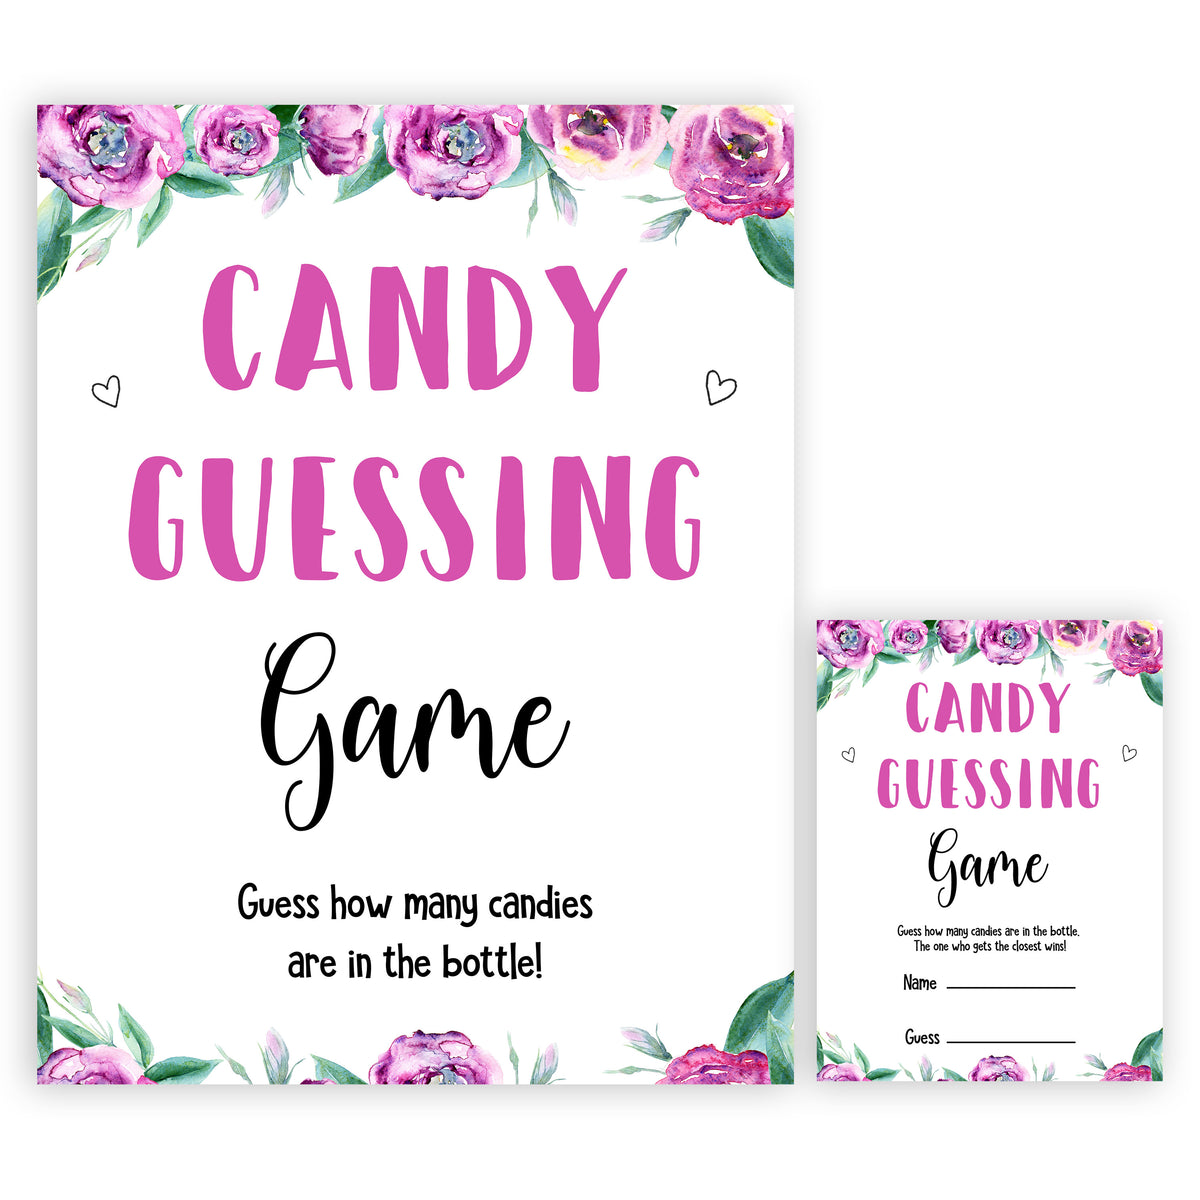 Purple peonies candy guessing game baby shower games, printable baby shower games, fun baby shower games, baby shower games, popular baby shower games, floral baby shower games, purple baby shower themes